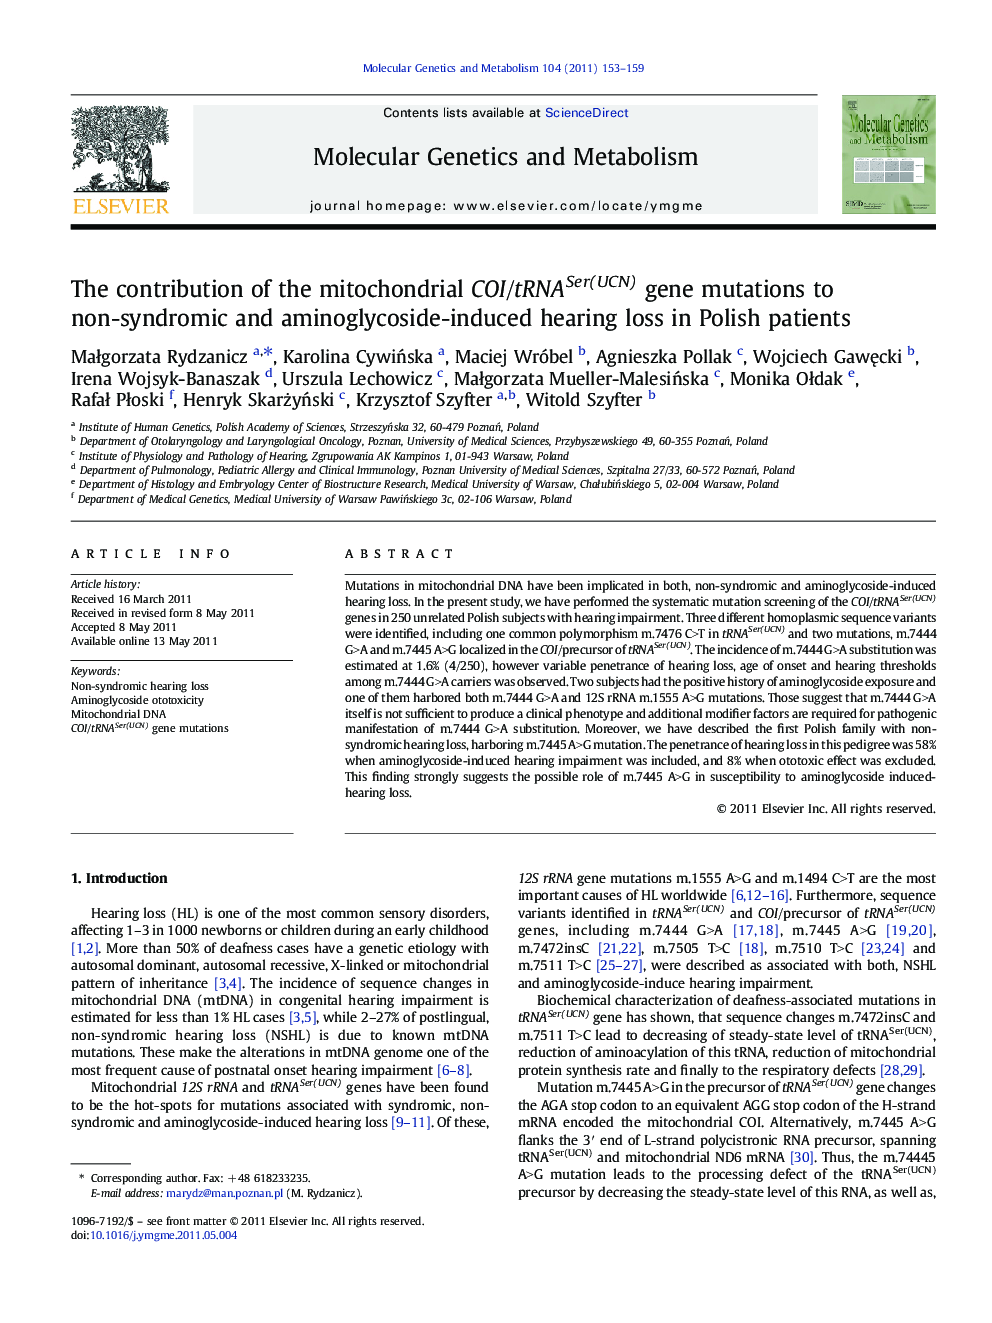 The contribution of the mitochondrial COI/tRNASer(UCN) gene mutations to non-syndromic and aminoglycoside-induced hearing loss in Polish patients